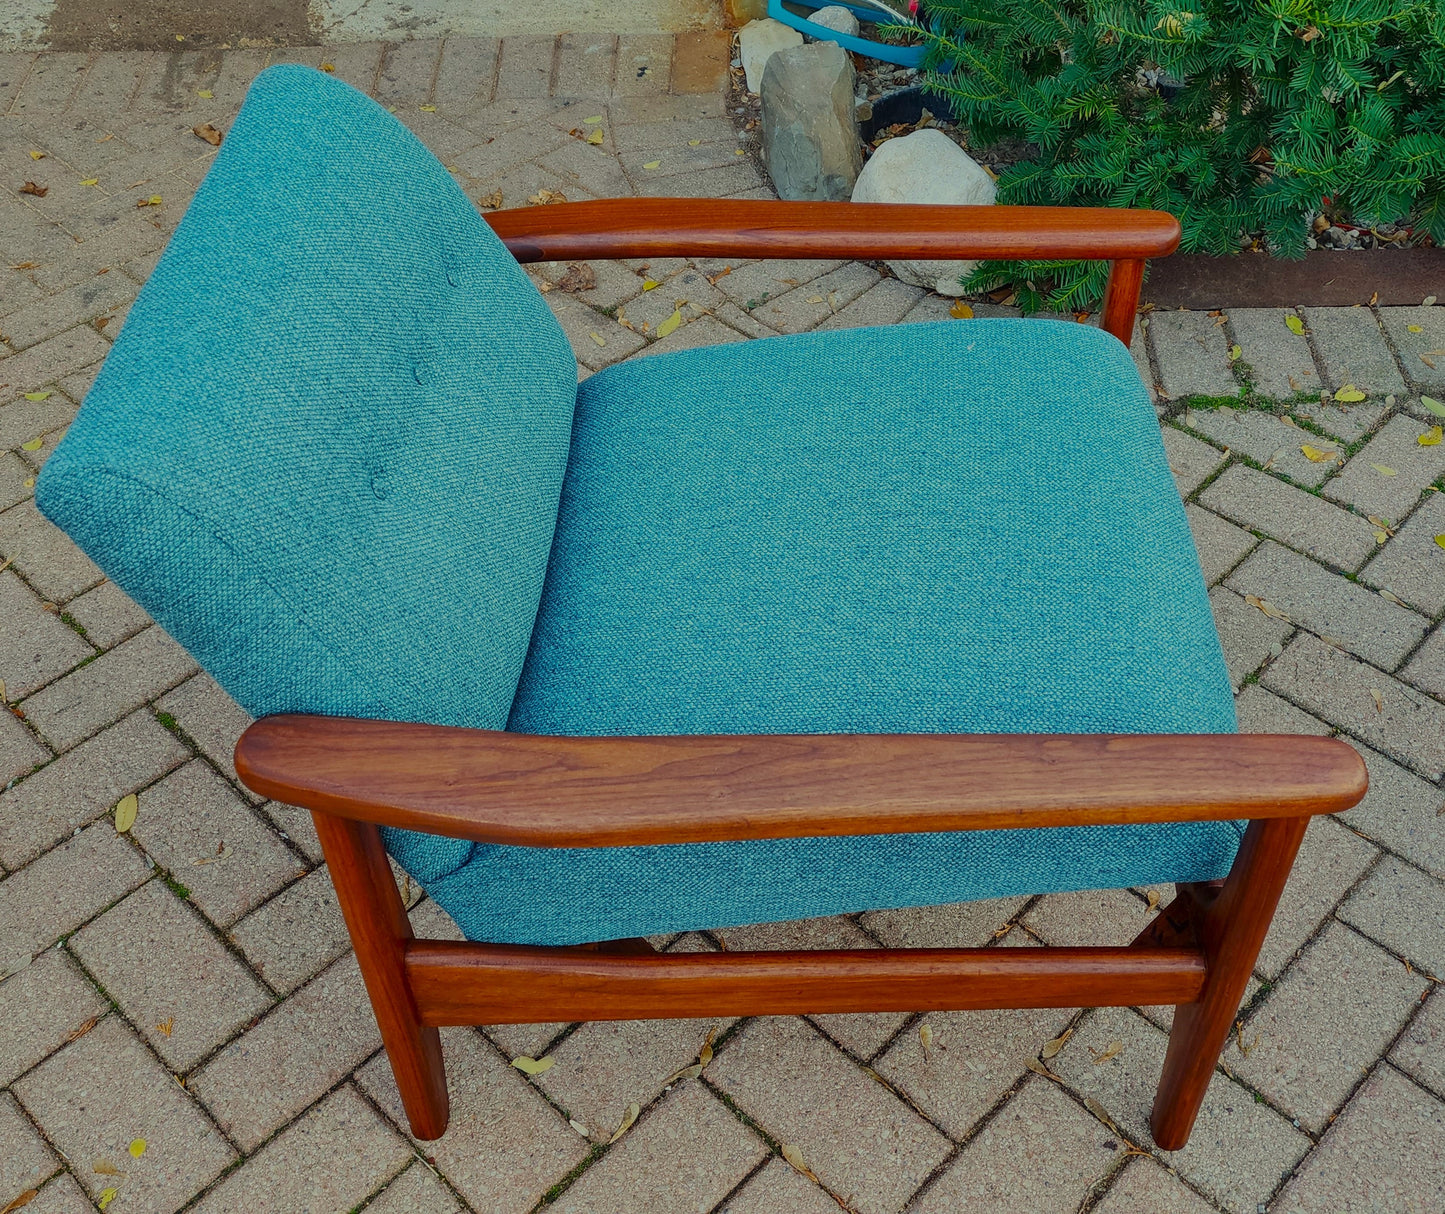 REFINISHED REUPHOLSTERED in Green Teal Mid Century Modern Teak Sofa 78" & Lounge Chair